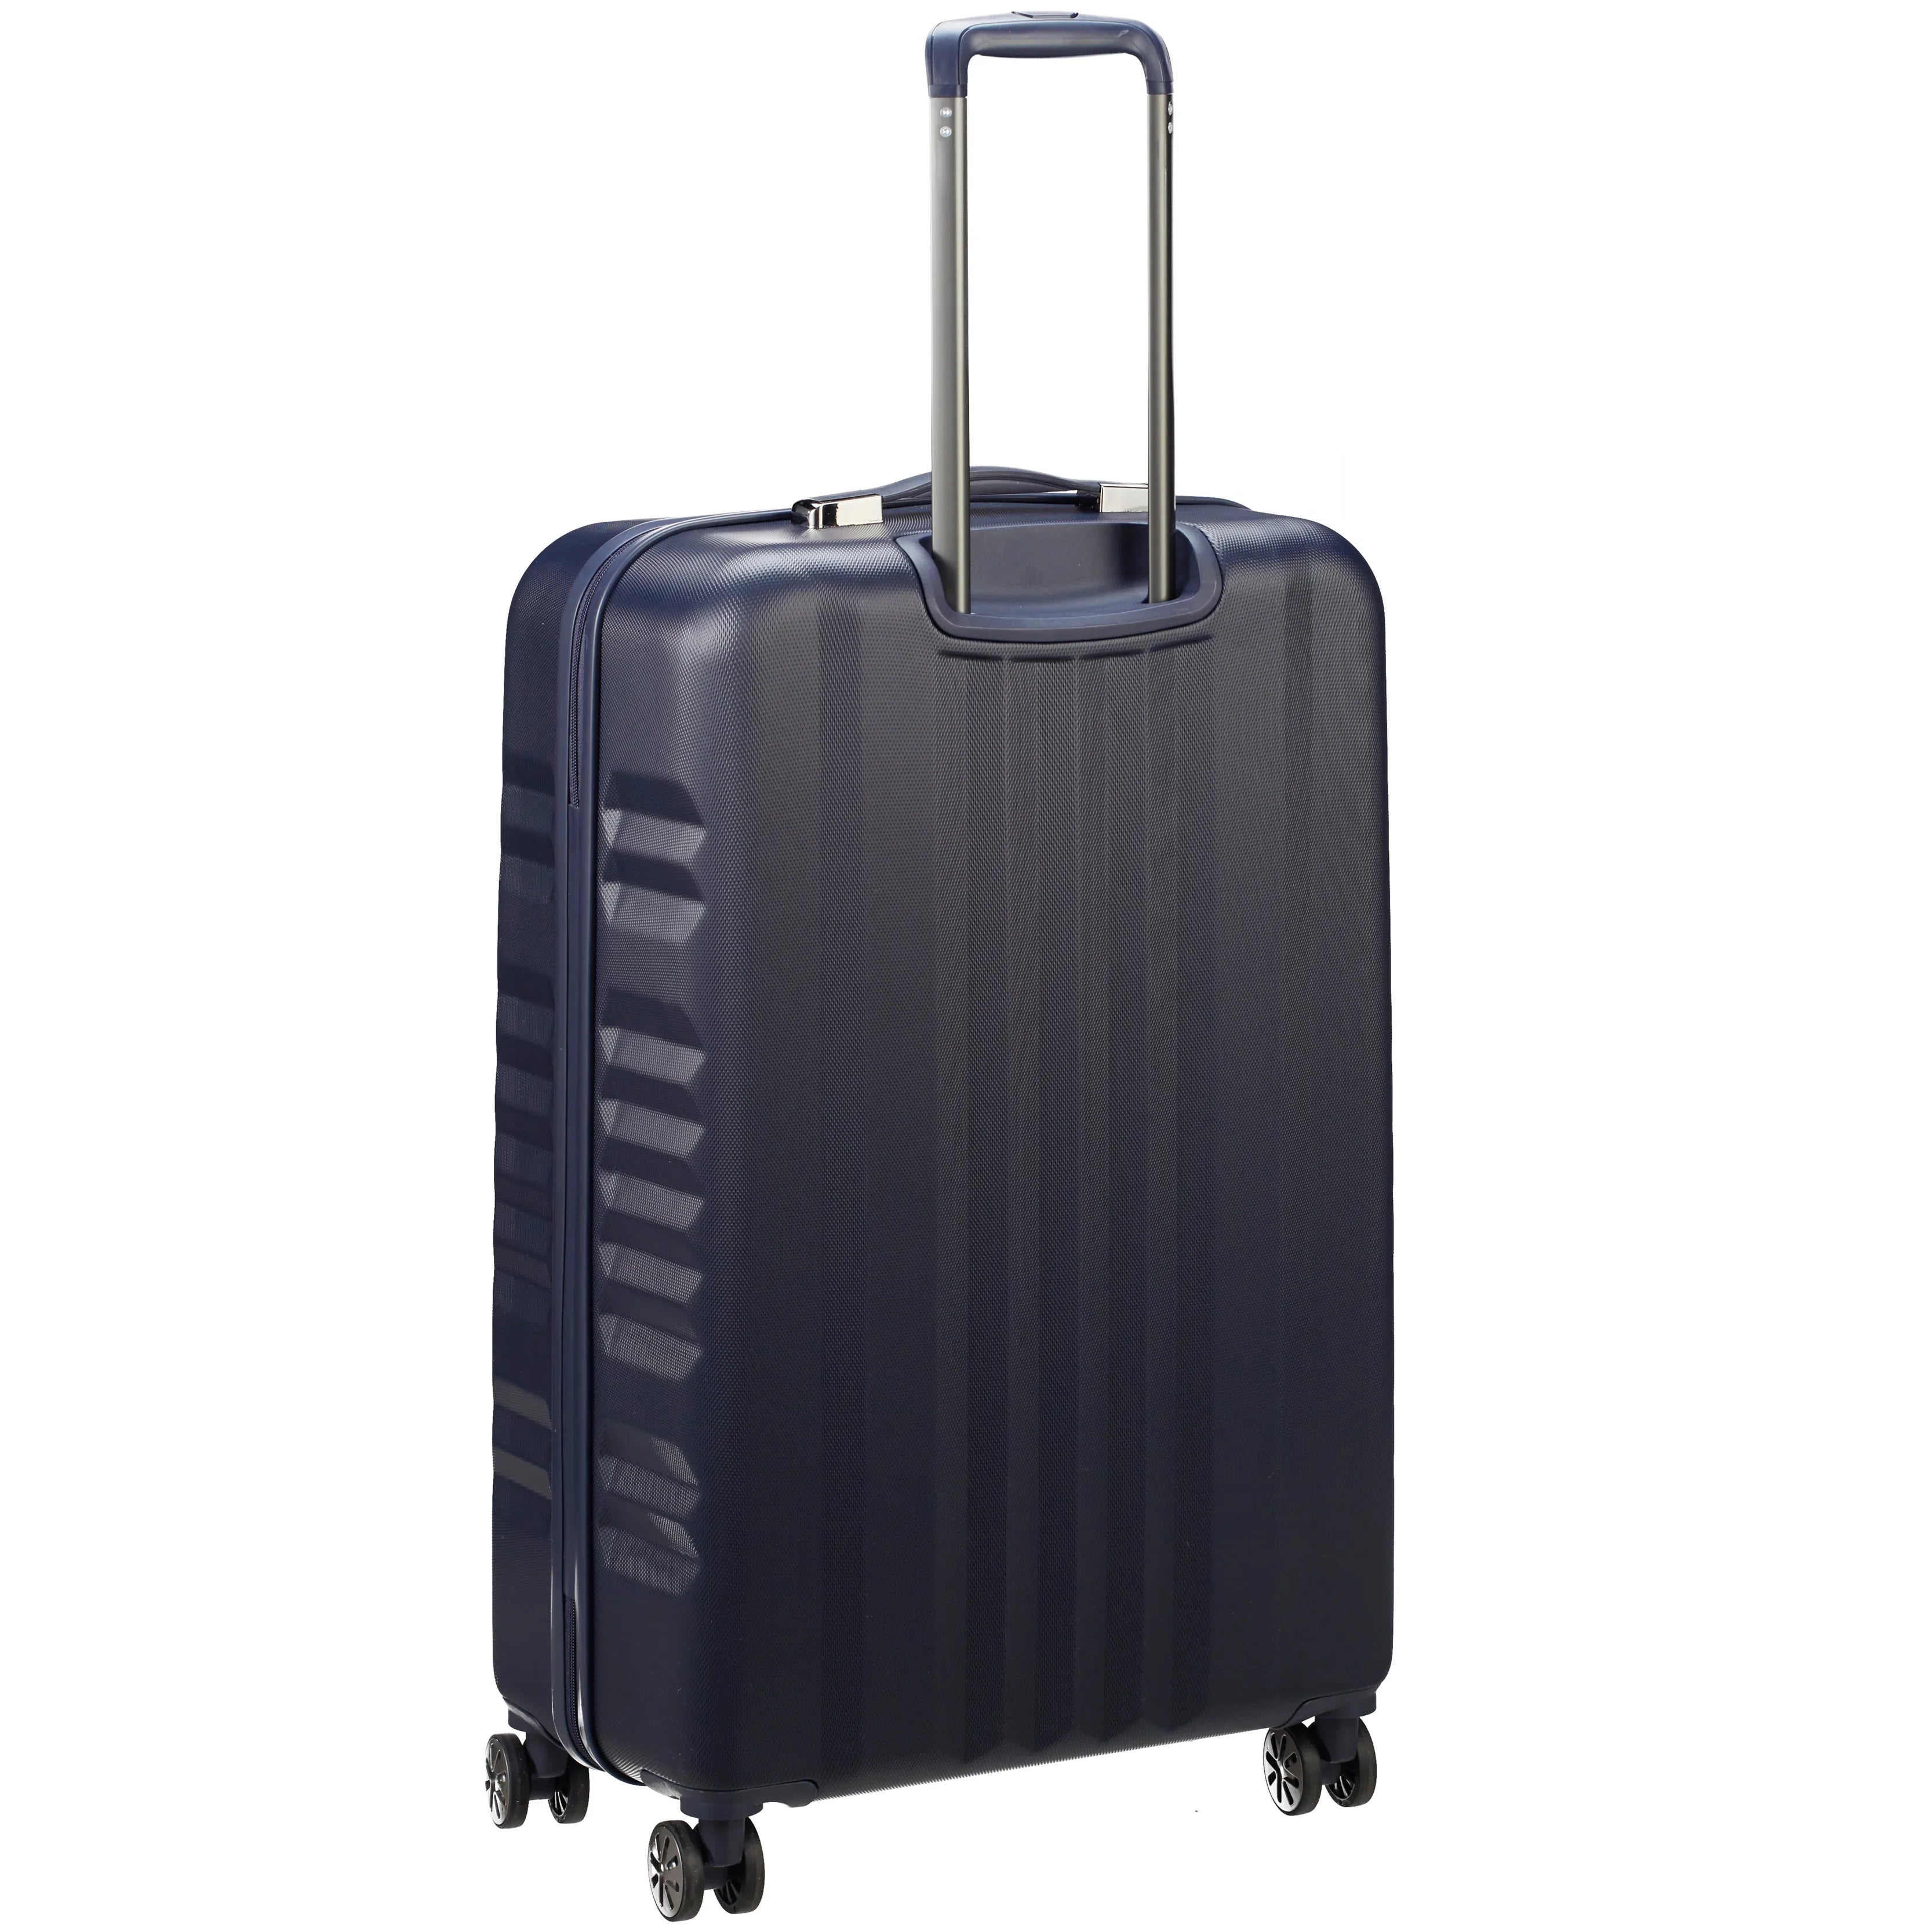 March 15 Trading Fly 4-Rollen Trolley 65 cm - bronze brushed